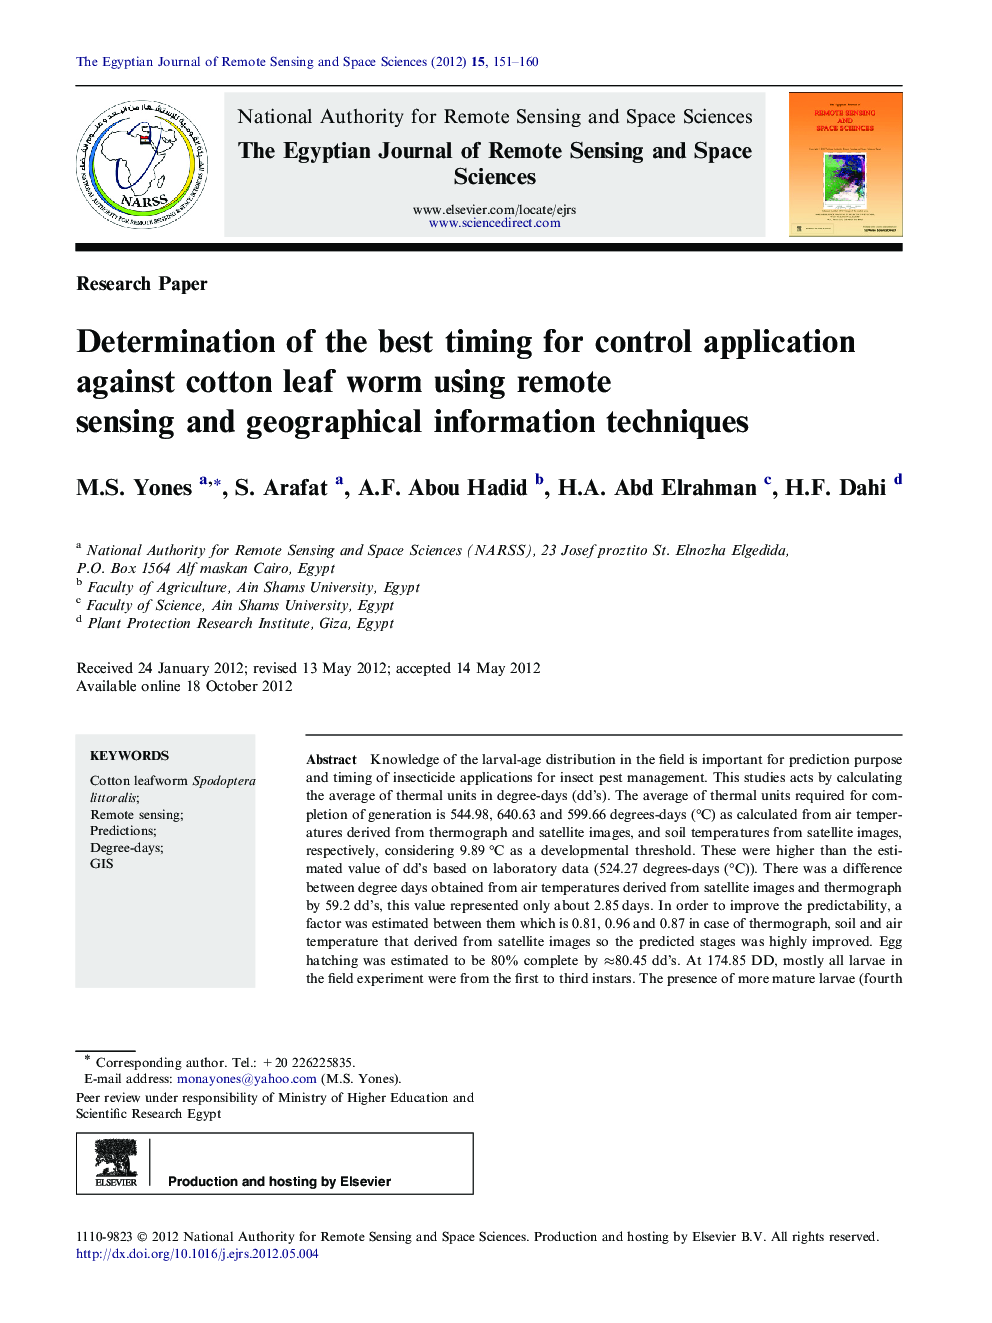 Determination of the best timing for control application against cotton leaf worm using remote sensing and geographical information techniques 